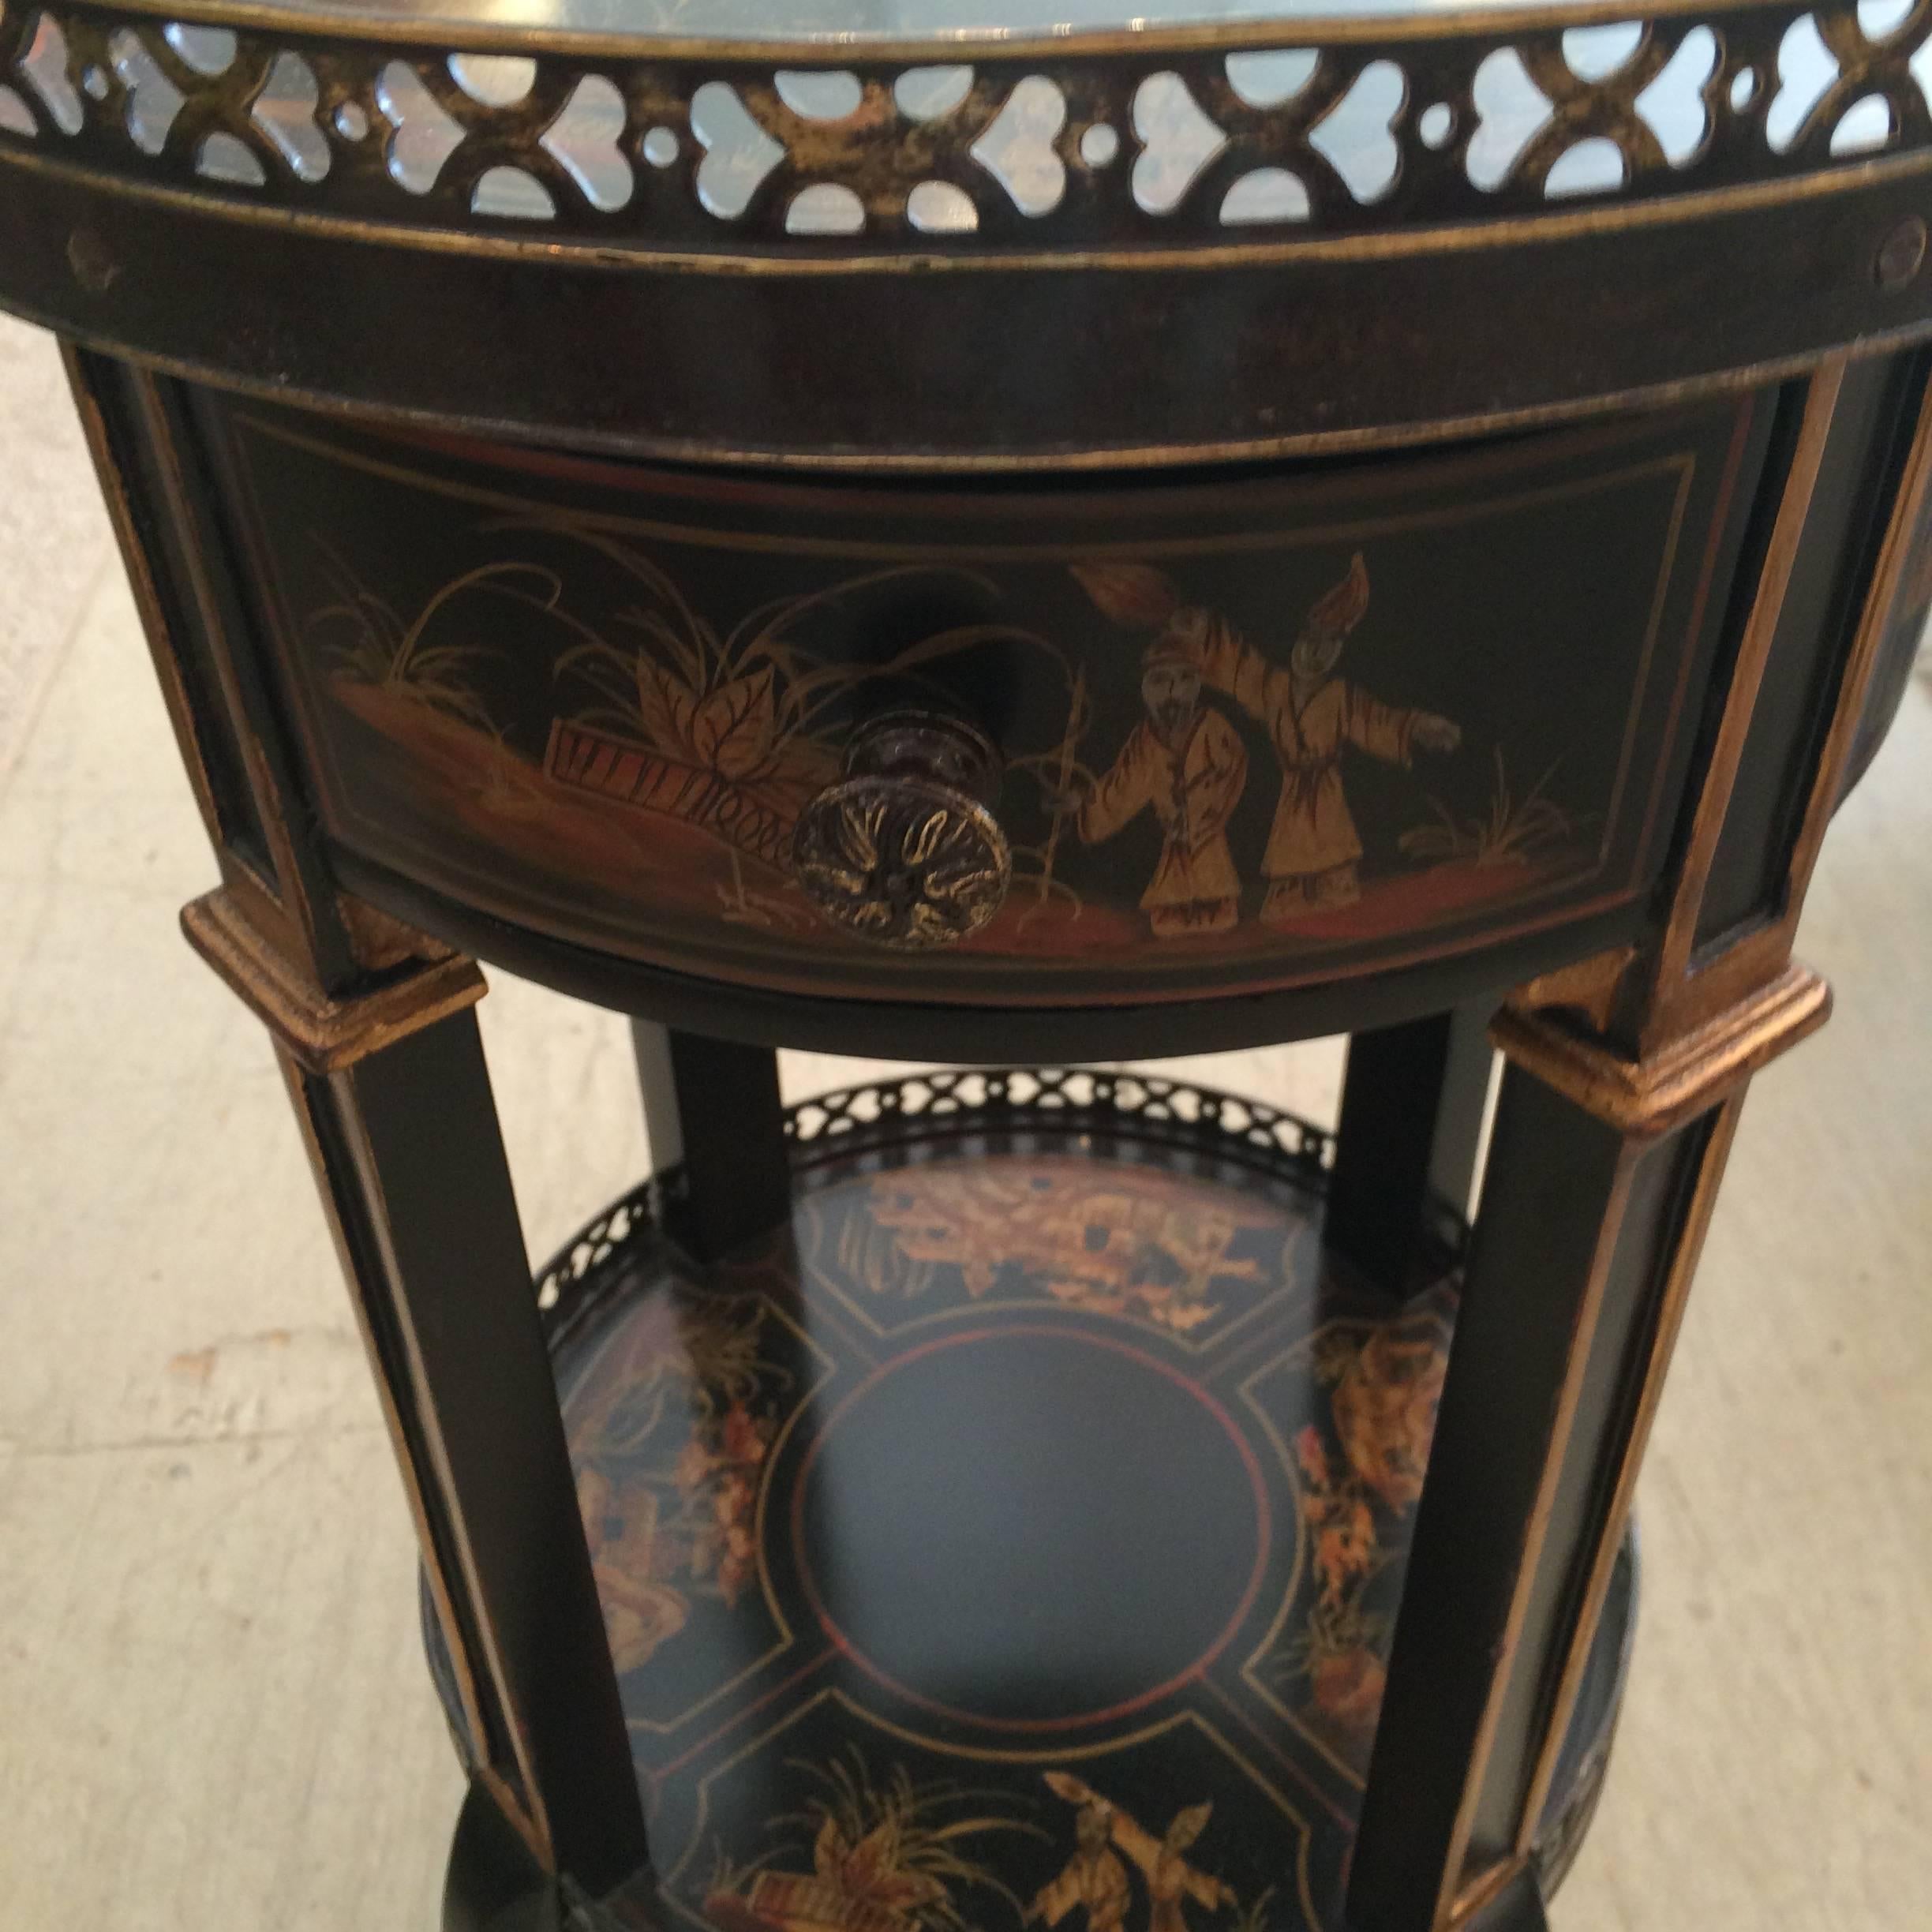 Lovely round two-tier side table by Theodore Alexander in black and gold with bronze galleries around the top and bottom surfaces and mounts on the feet. Single drawer. Bottom tier is 11.25